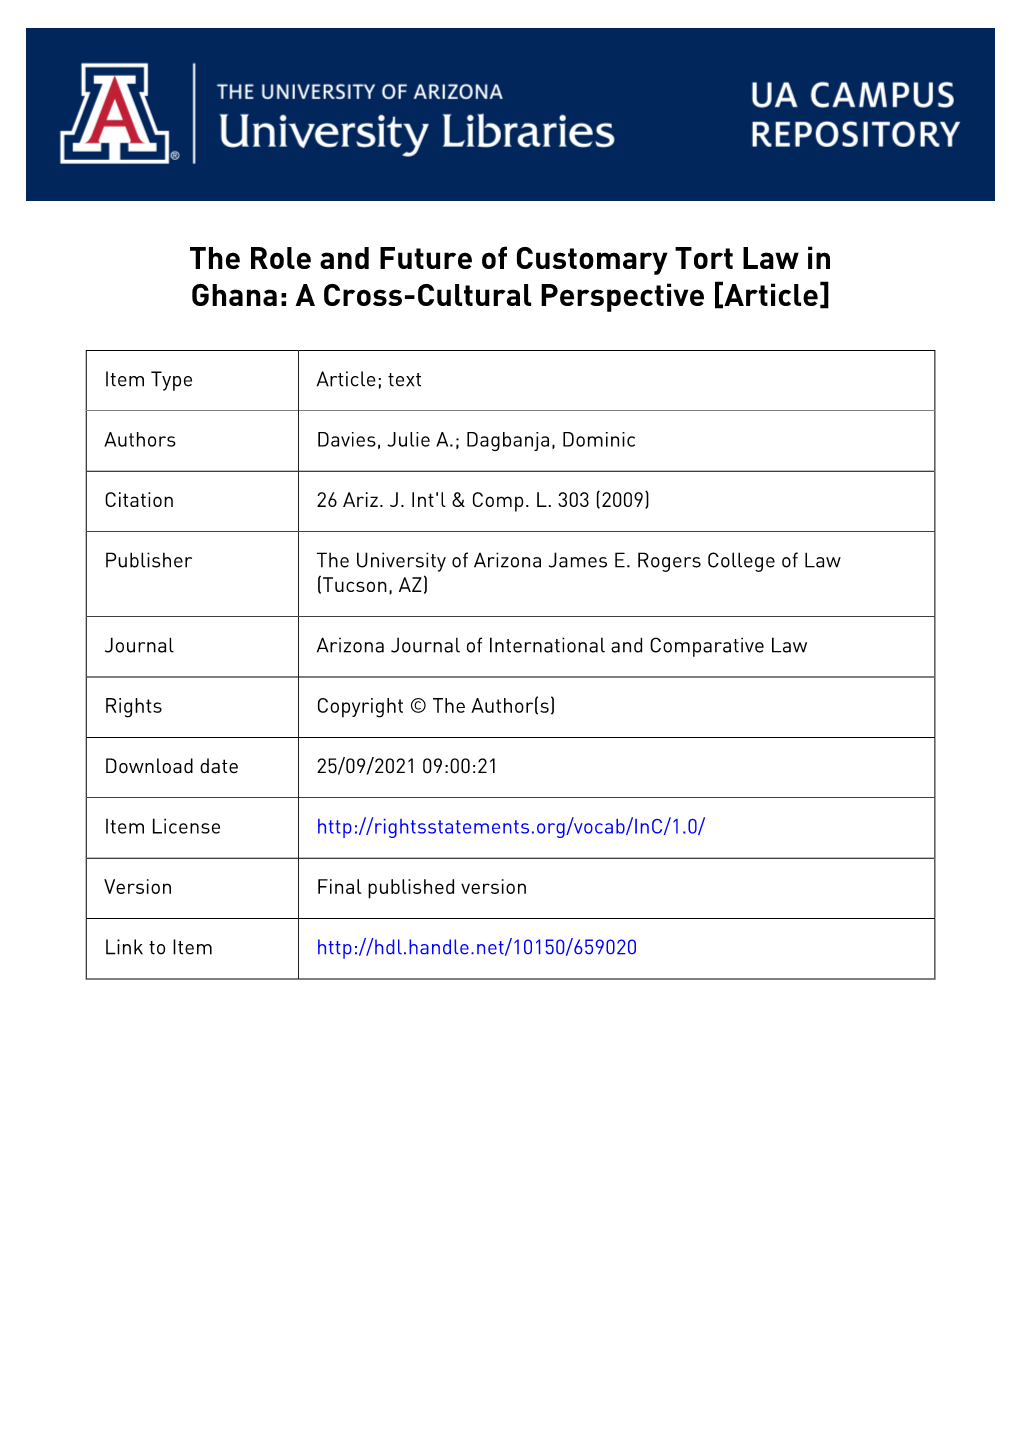 The Role and Future of Customary Tort Law in Ghana: a Cross-Cultural Perspective [Article]